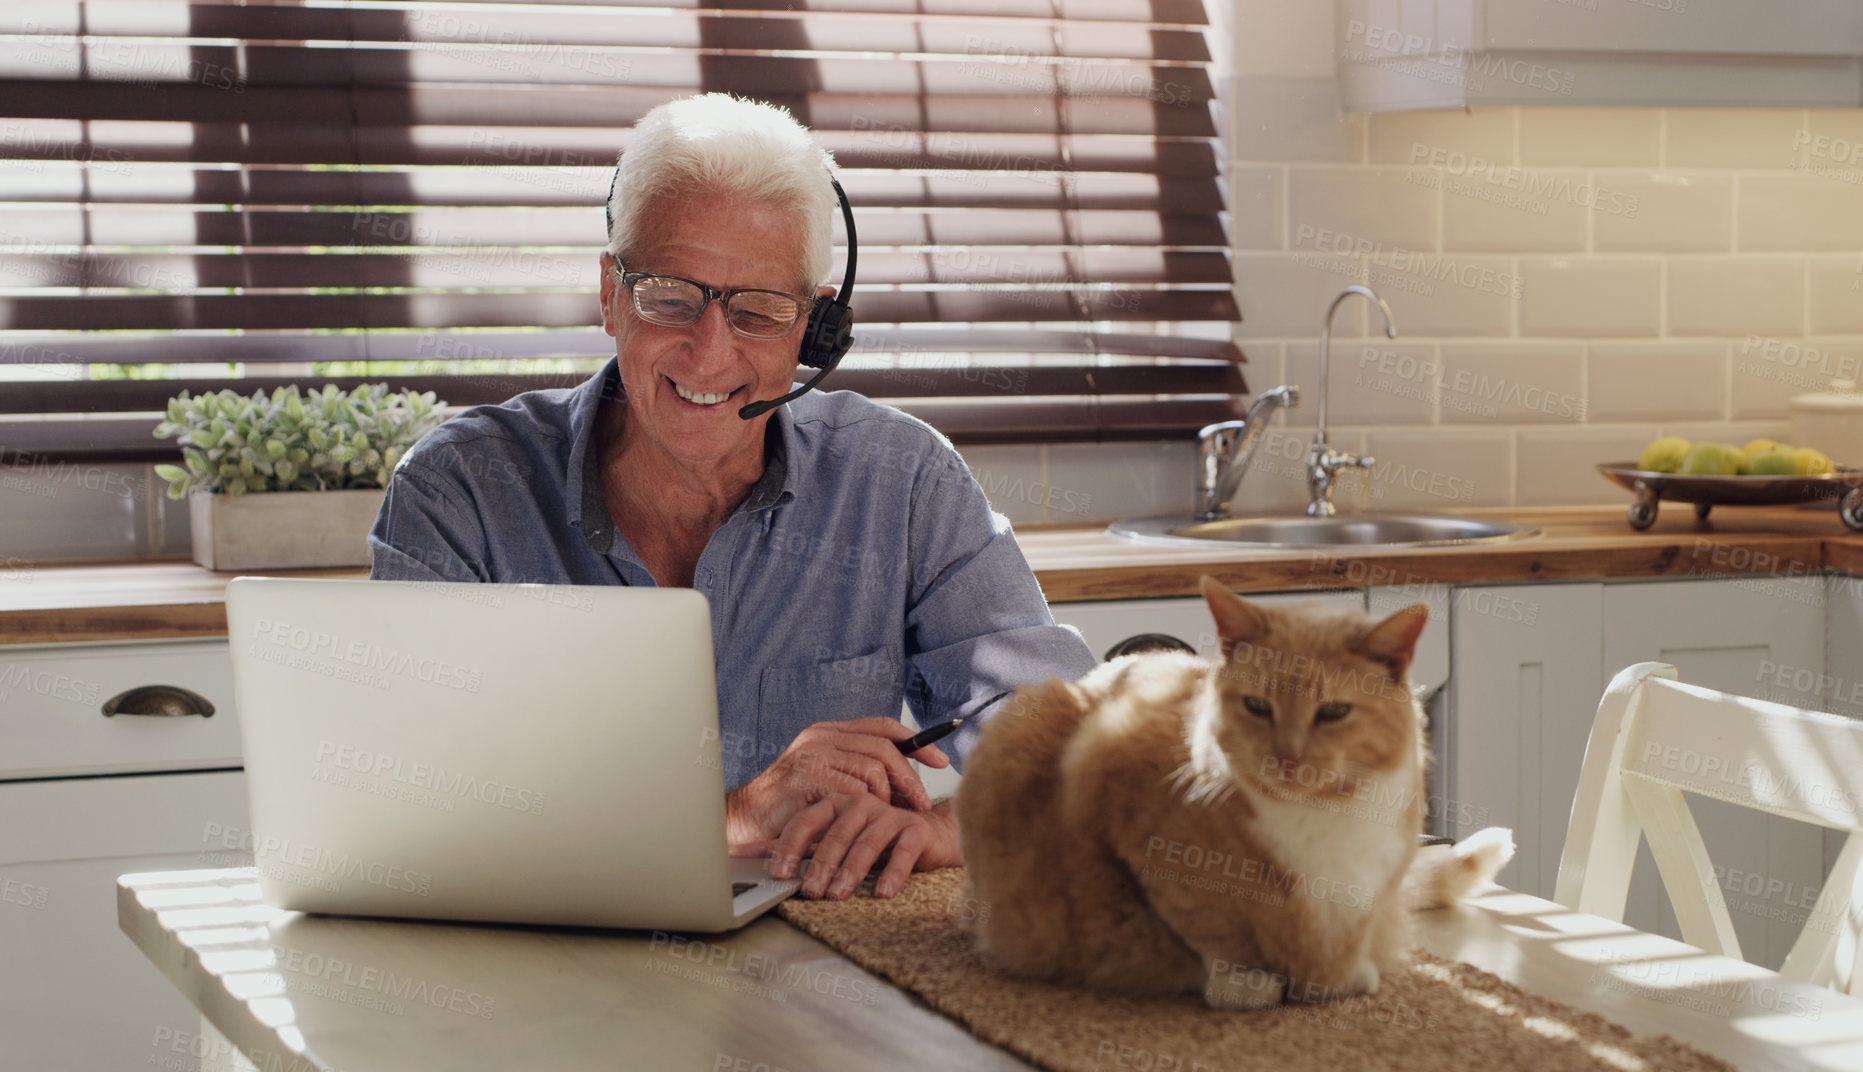 Buy stock photo Laptop, pet and man with headset in home with customer service consultation for online crm. Technology, cat and mature male technical support or telemarketing agent working on computer in kitchen.